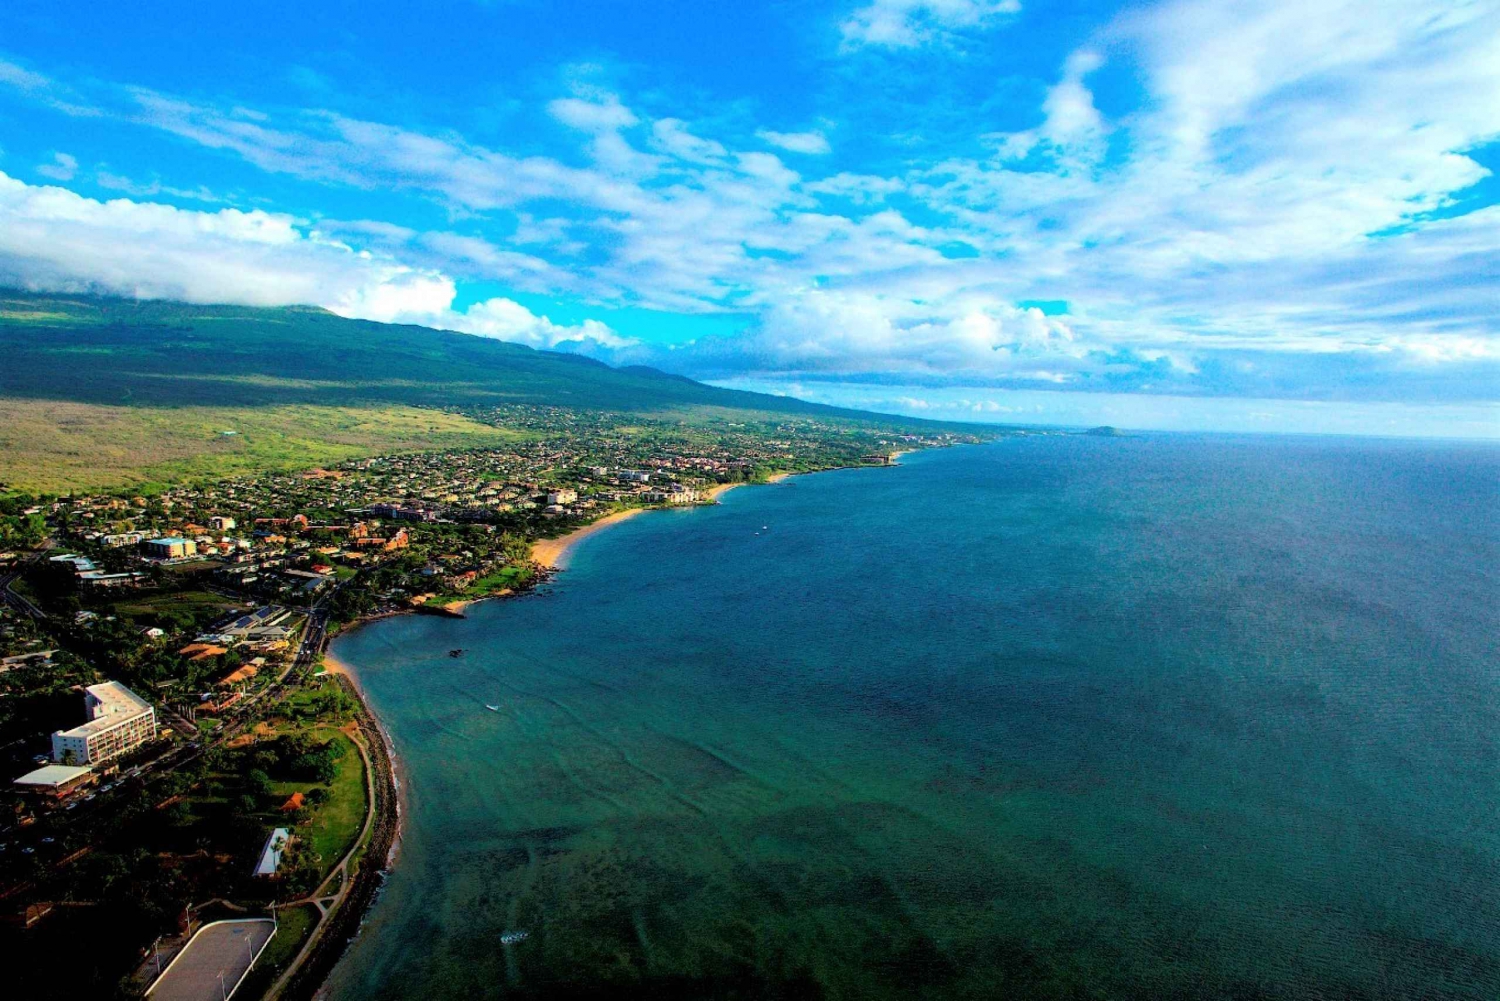 Maui: Private Customizable Island Tour with Transfer